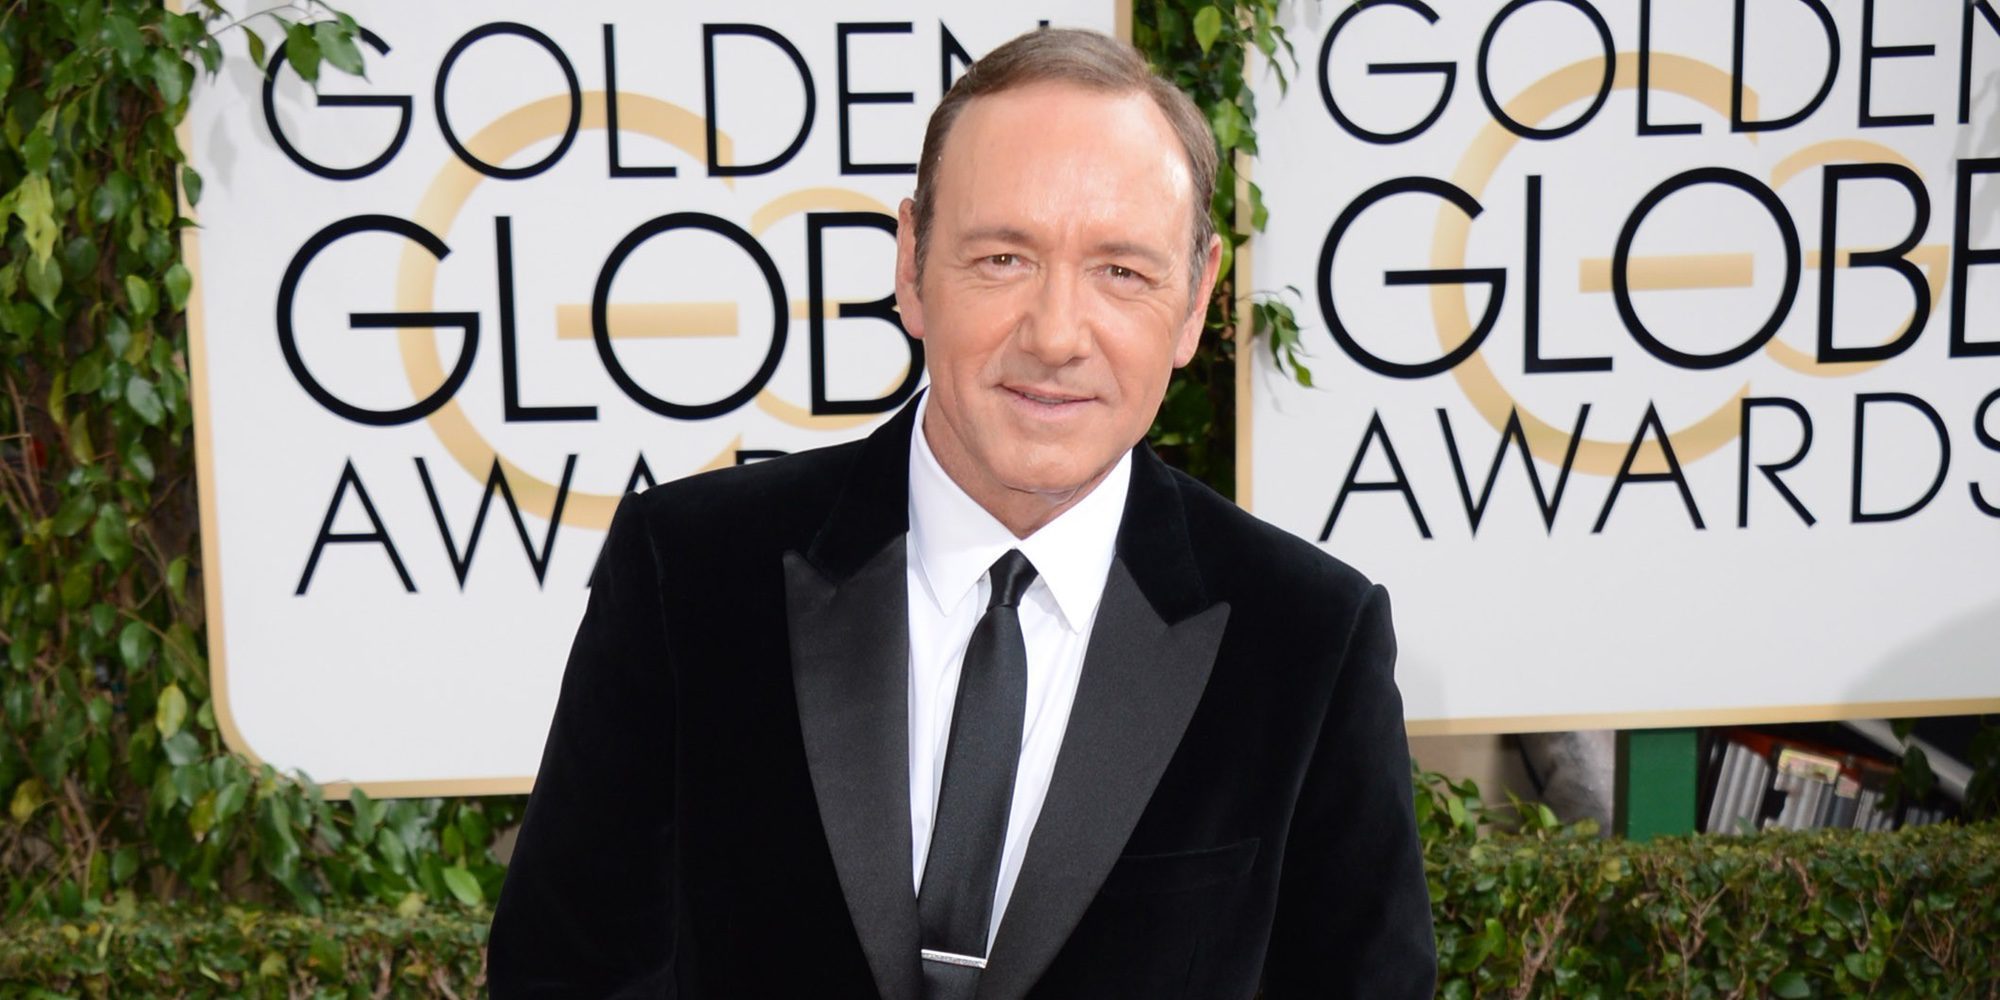 Ridley Scott sustituye a Kevin Spacey por Christopher Plummer en 'All the Money in the World'